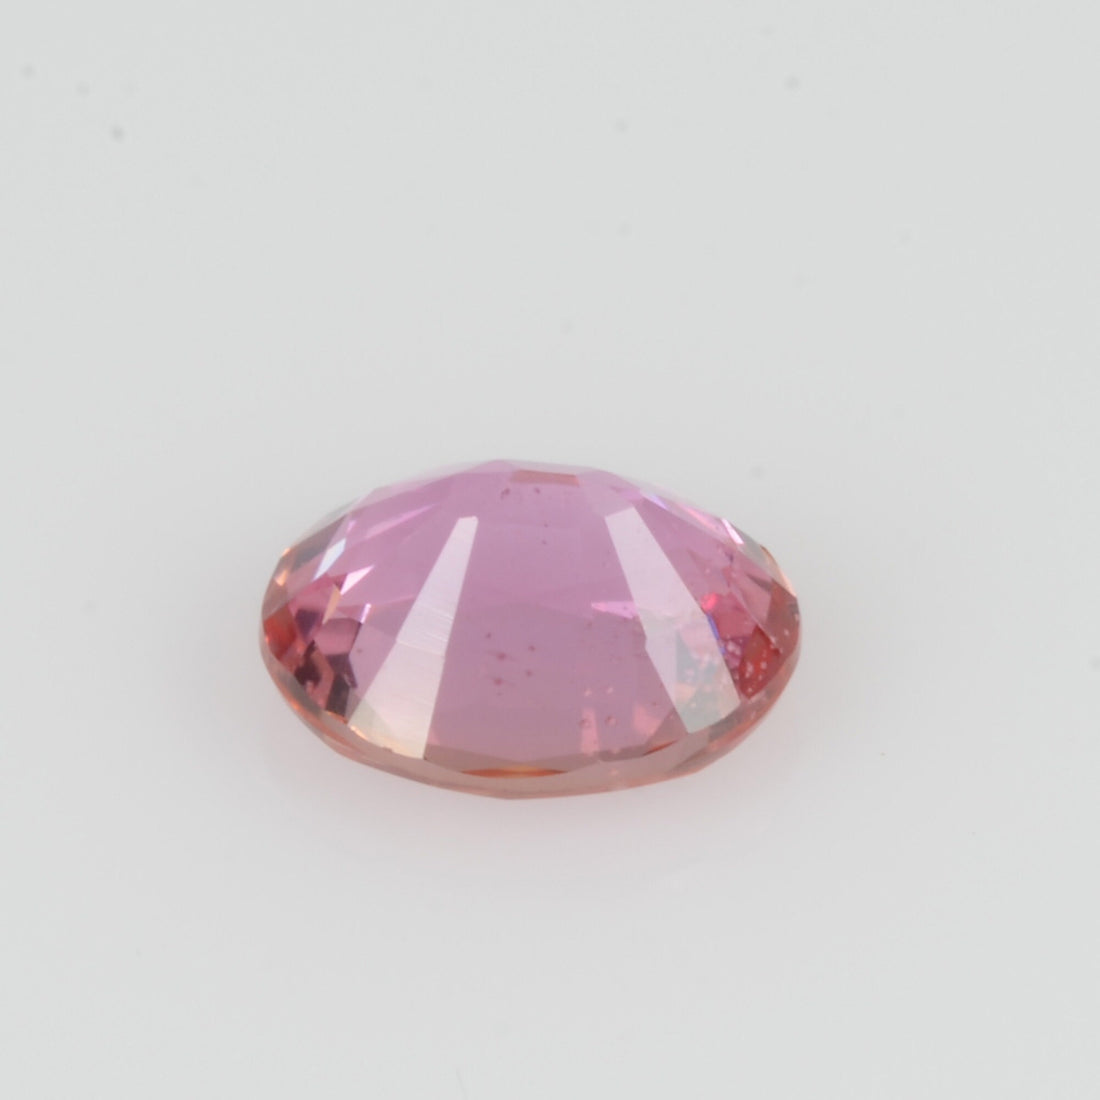 0.44 cts Natural Pink Sapphire Loose Gemstone oval Cut